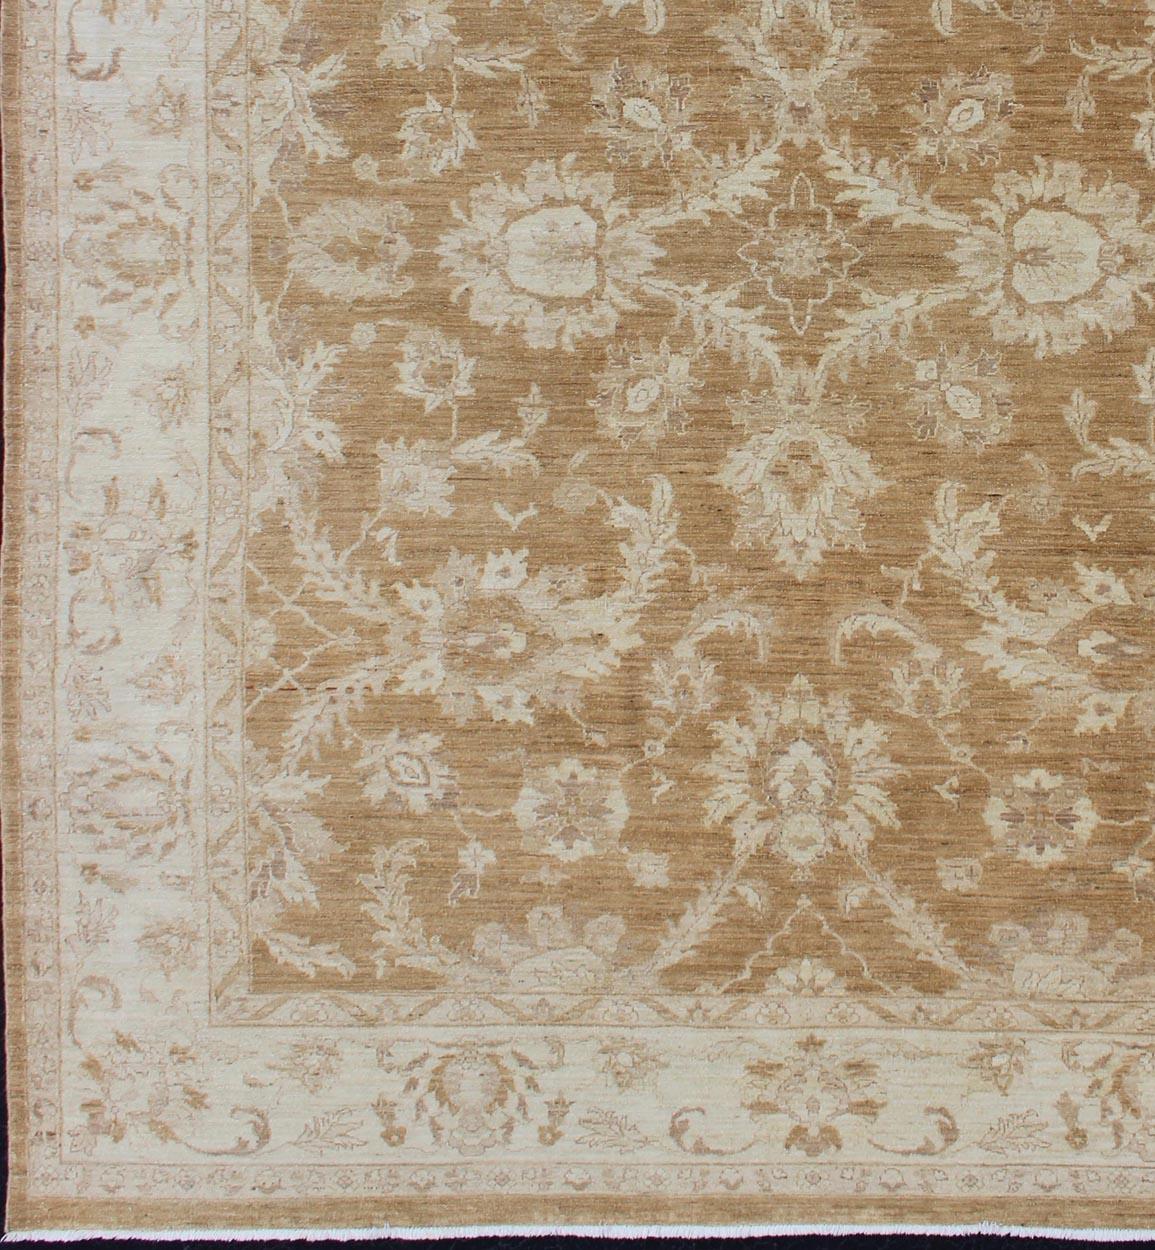 Sultanabad Design Afghan Made Floral Pattern in Earth Tones with Light Caramel In Good Condition For Sale In Atlanta, GA